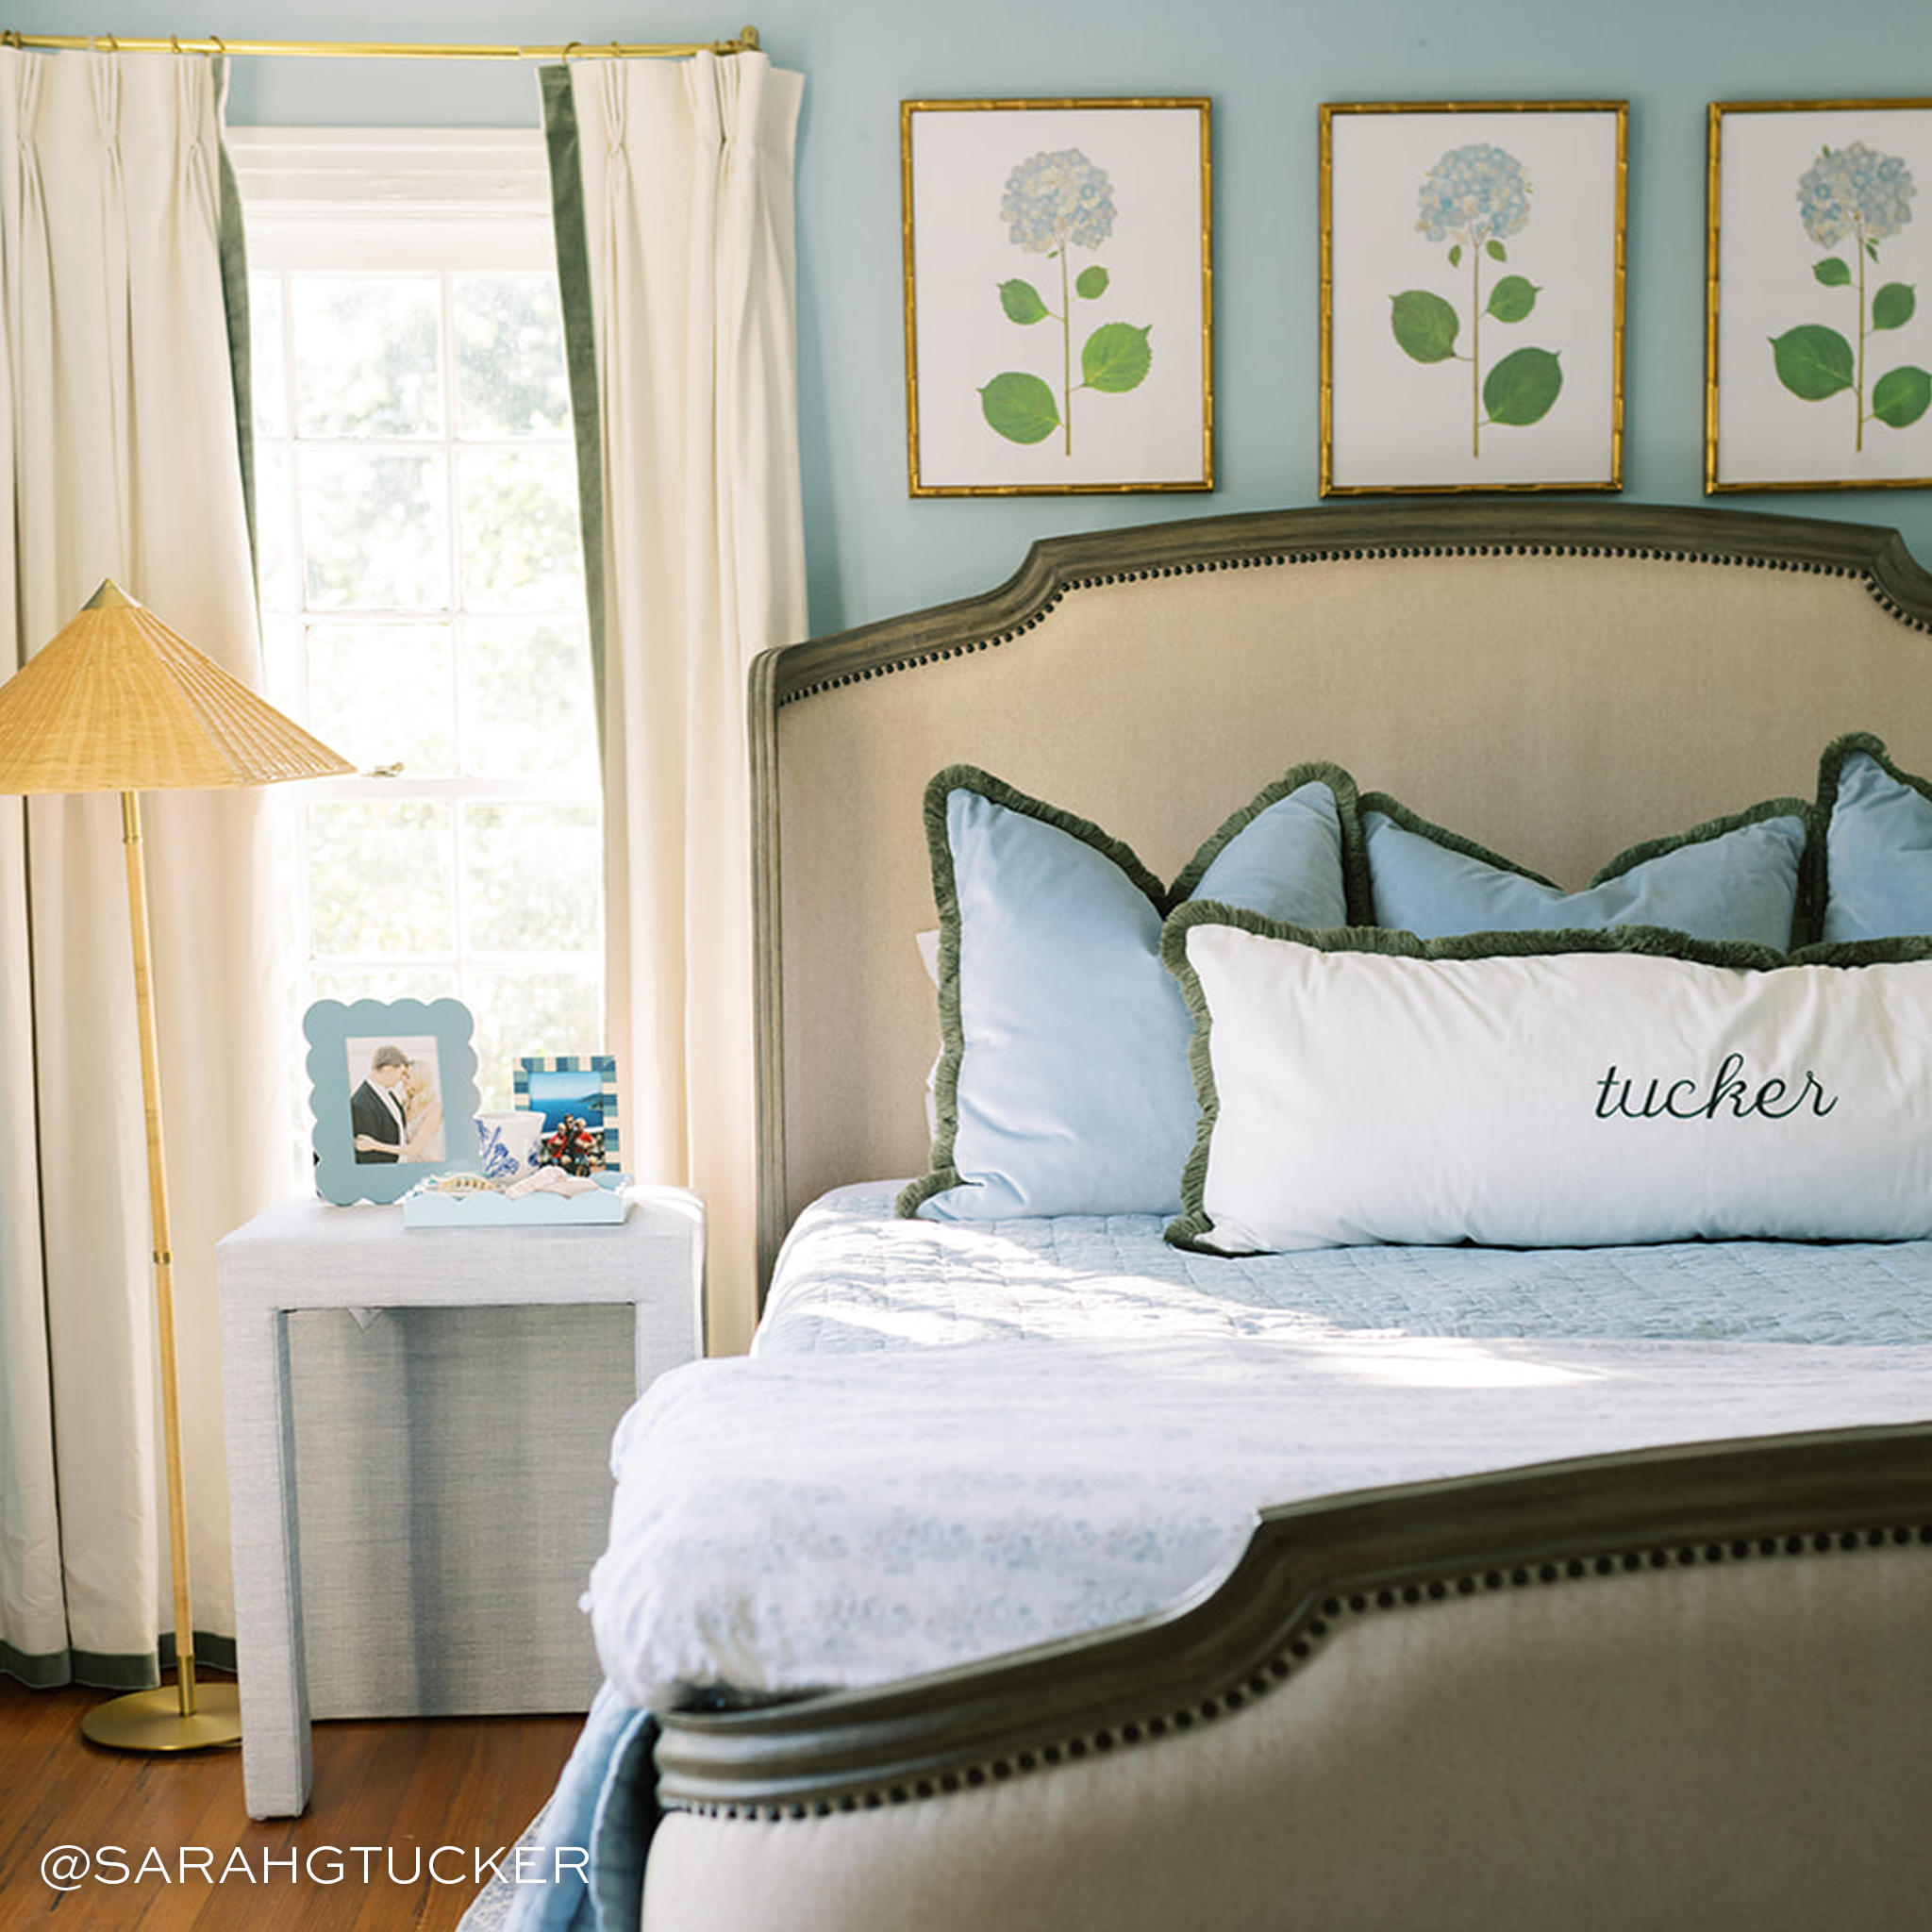 Bedroom with whie curtains with green trim on the window and a cream colored bed in front with three light blue velvet pillows behind a white pillow with embroidery that says "Tucker"